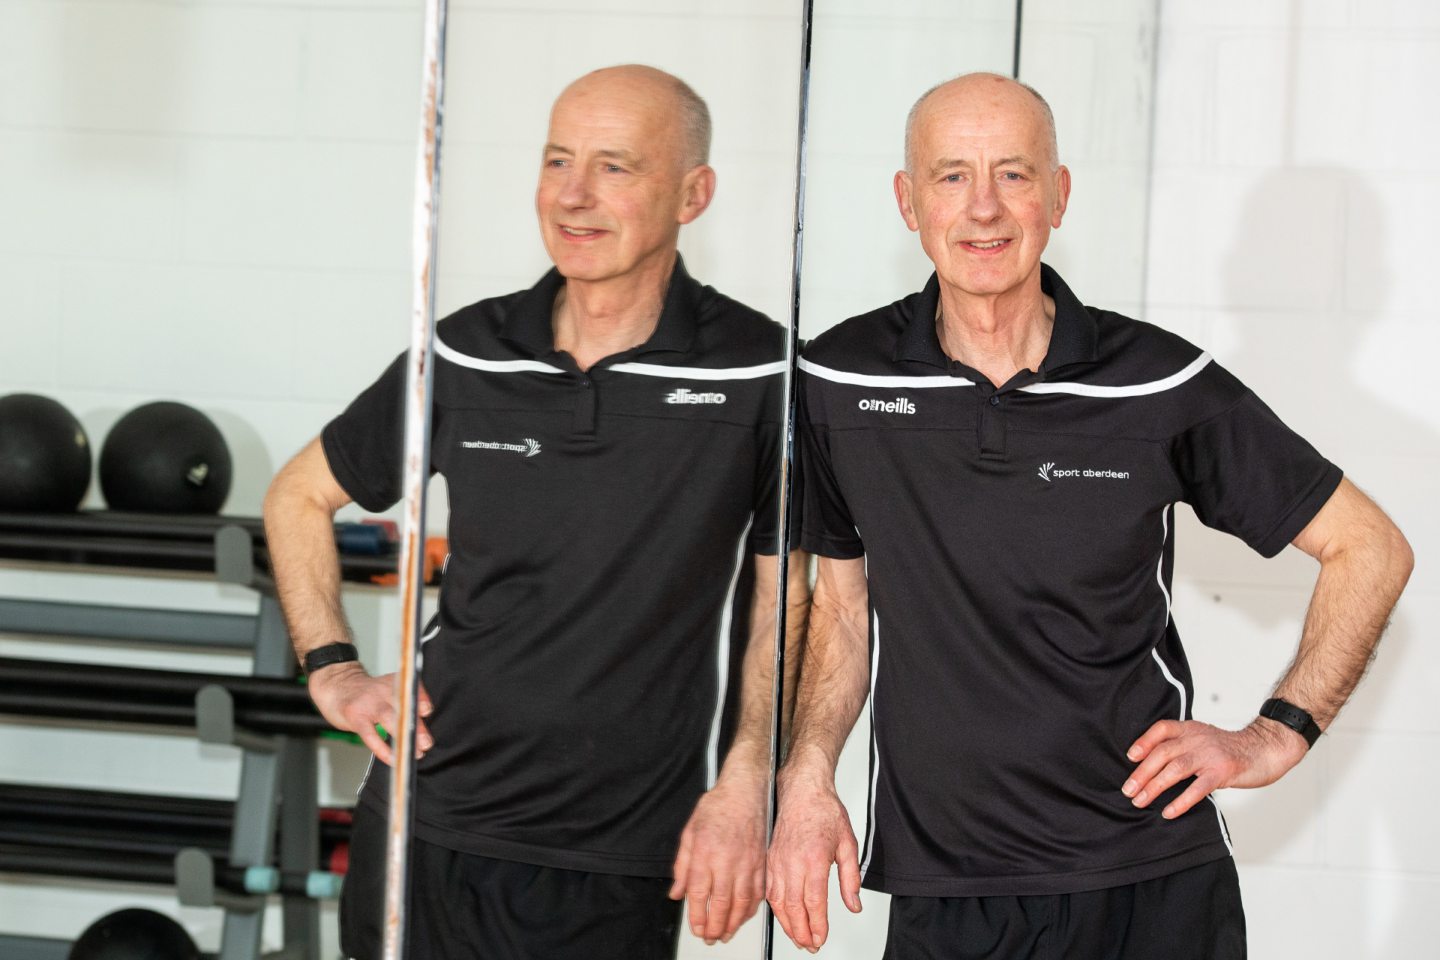 Bill has recently been shortlisted as a finalist in Aberdeen’s Sports Awards 2023 - with his Parkinson's fitness class participants always singing his praises. Image: Kami Thomson/DC Thomson